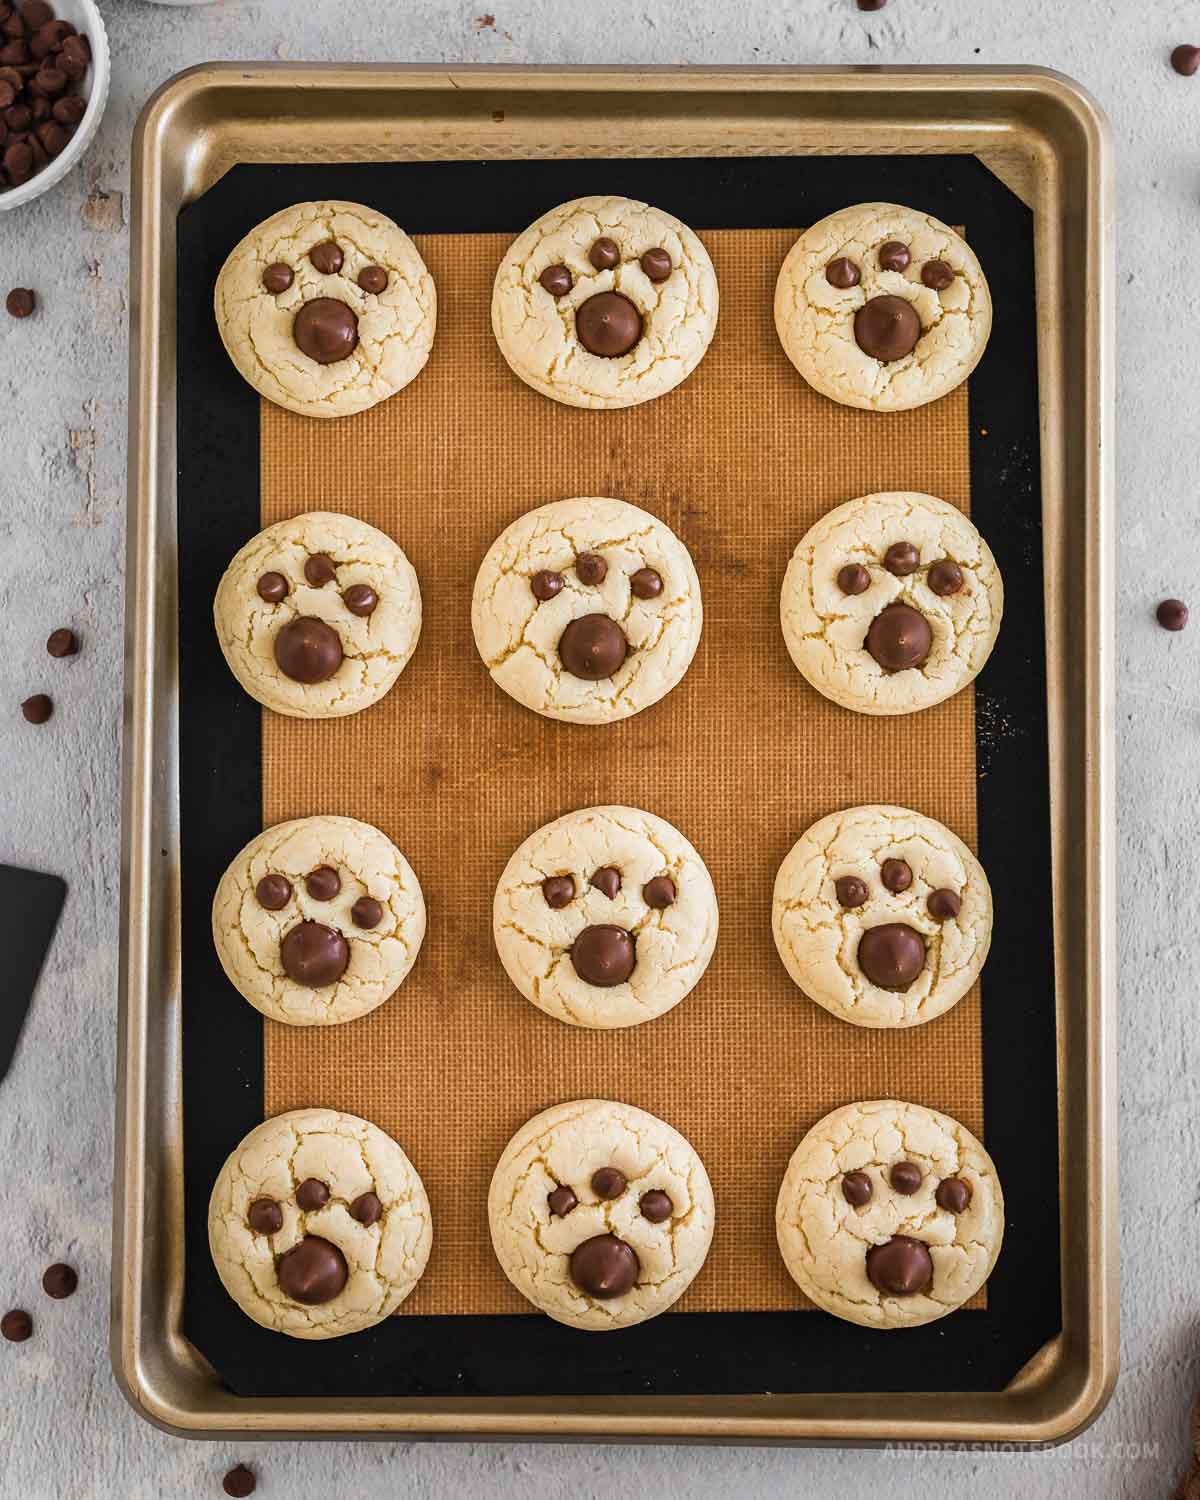 1 hershey kiss and 3 chocolate chip pressed into each of the 12 cookies to make a little bear paw.